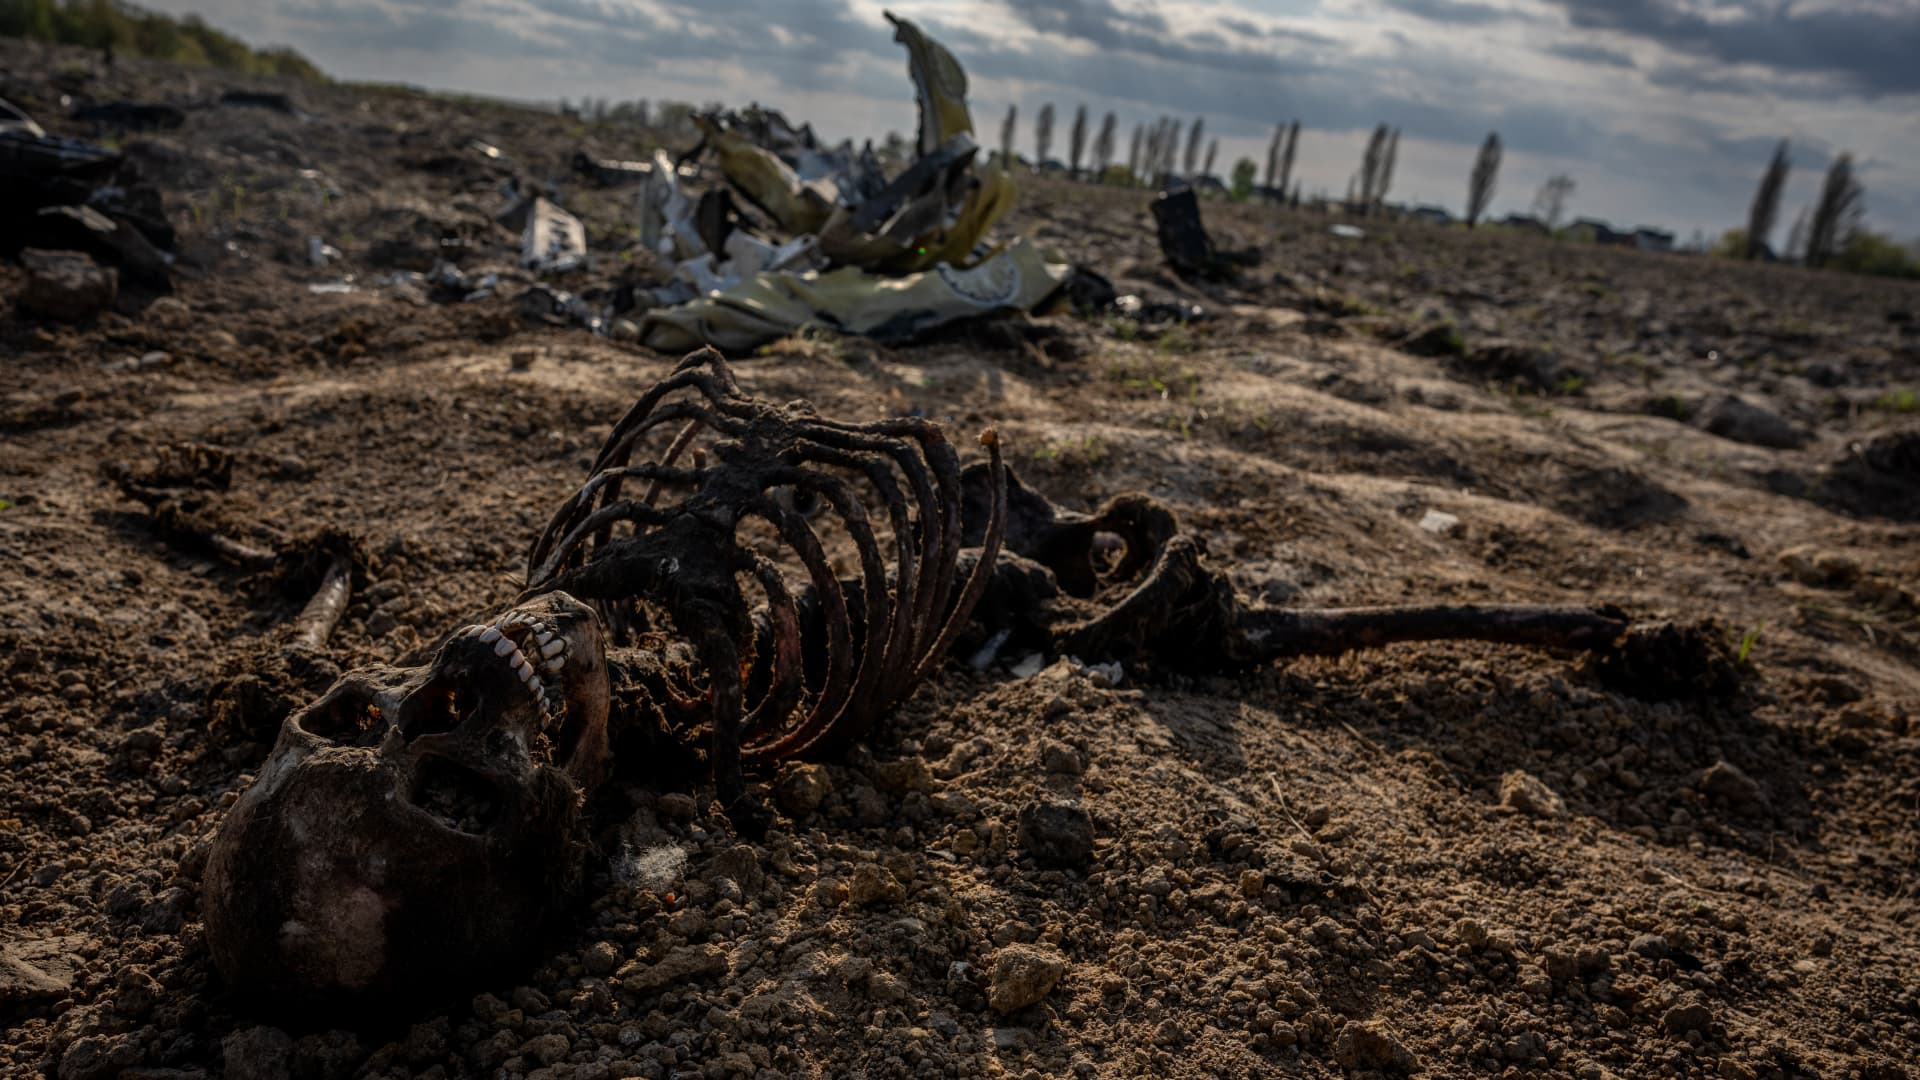 MAKARIV, UKRAINE - MAY 2: (EDITORS NOTE: Image depicts death) The skeleton of a Russian is seen near a destroyed helicopter on a field outside of Makariv, Kyiv Oblast, Ukraine on May 2, 2022.